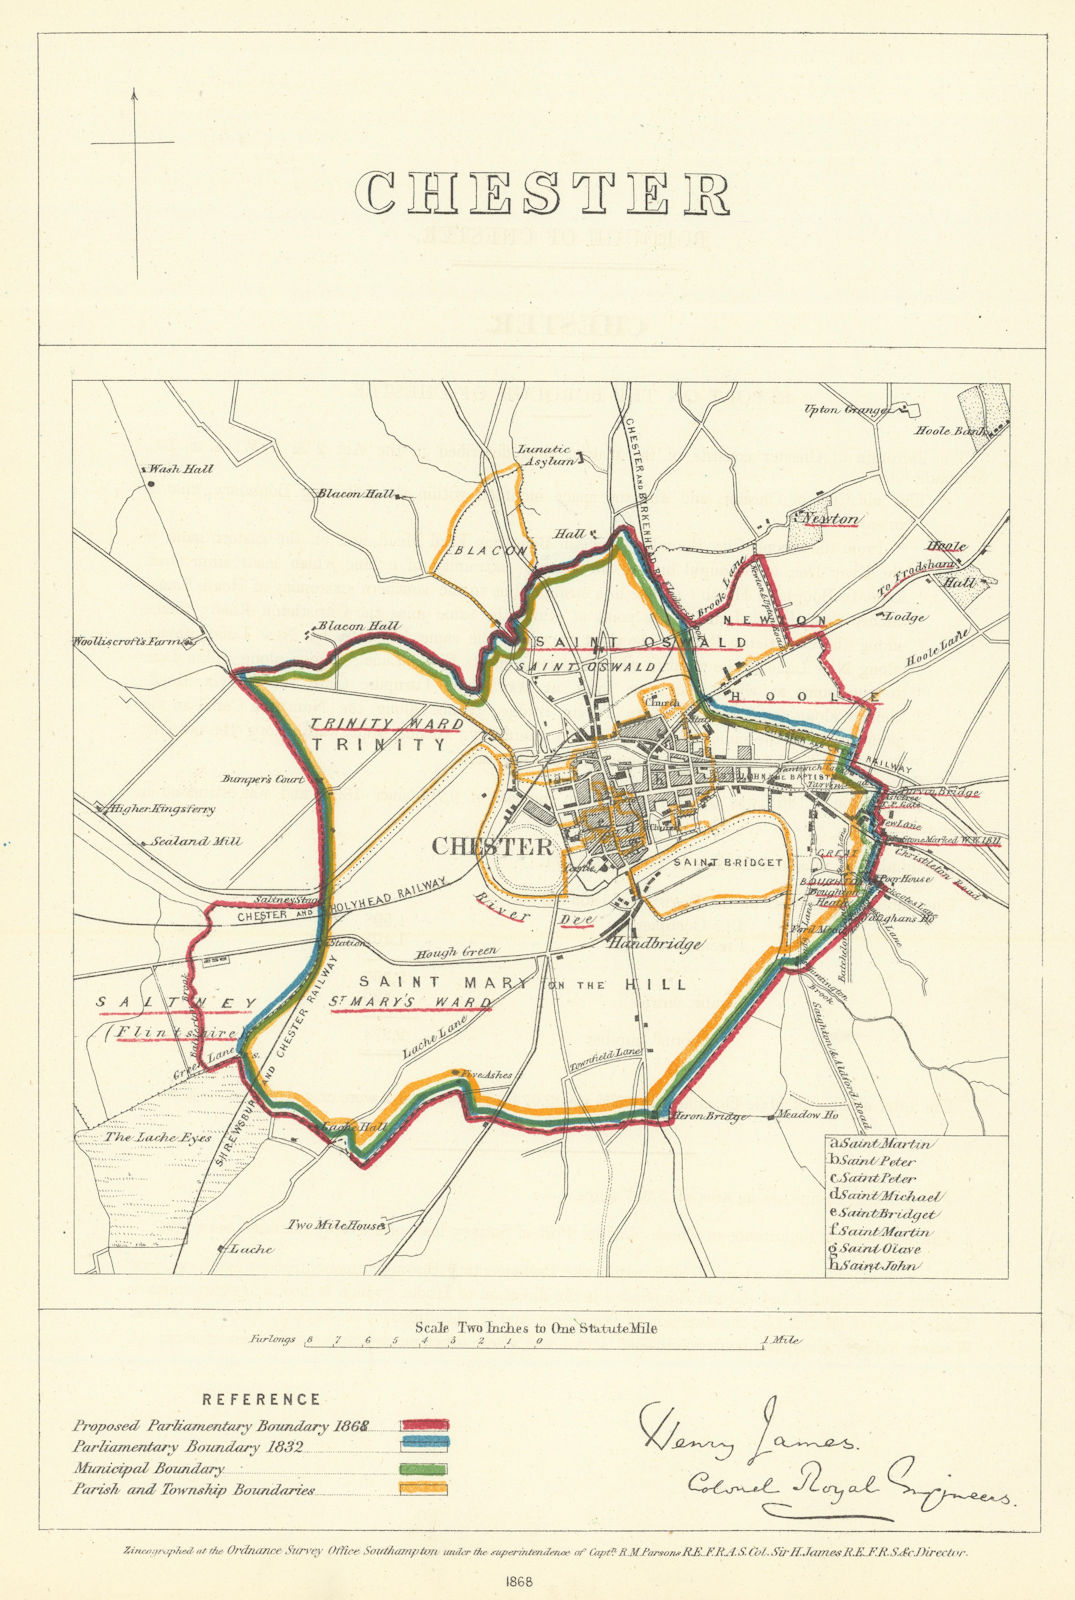 Chester, Cheshire. JAMES. Parliamentary Boundary Commission 1868 old map